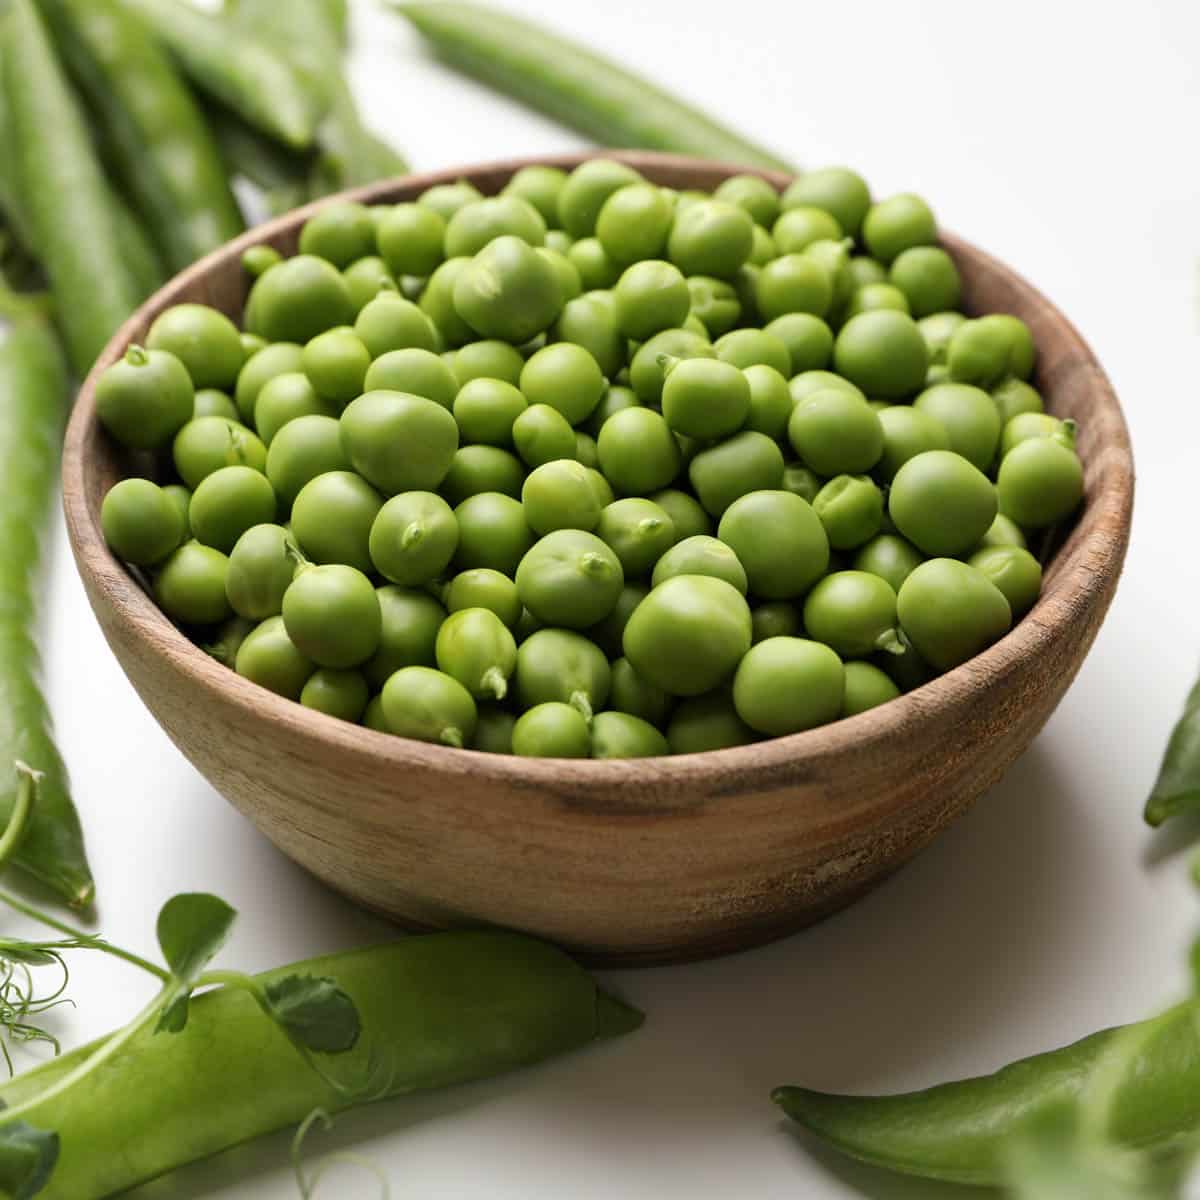 Wooden bowl filled with fresh peas and fresh pods in the background.